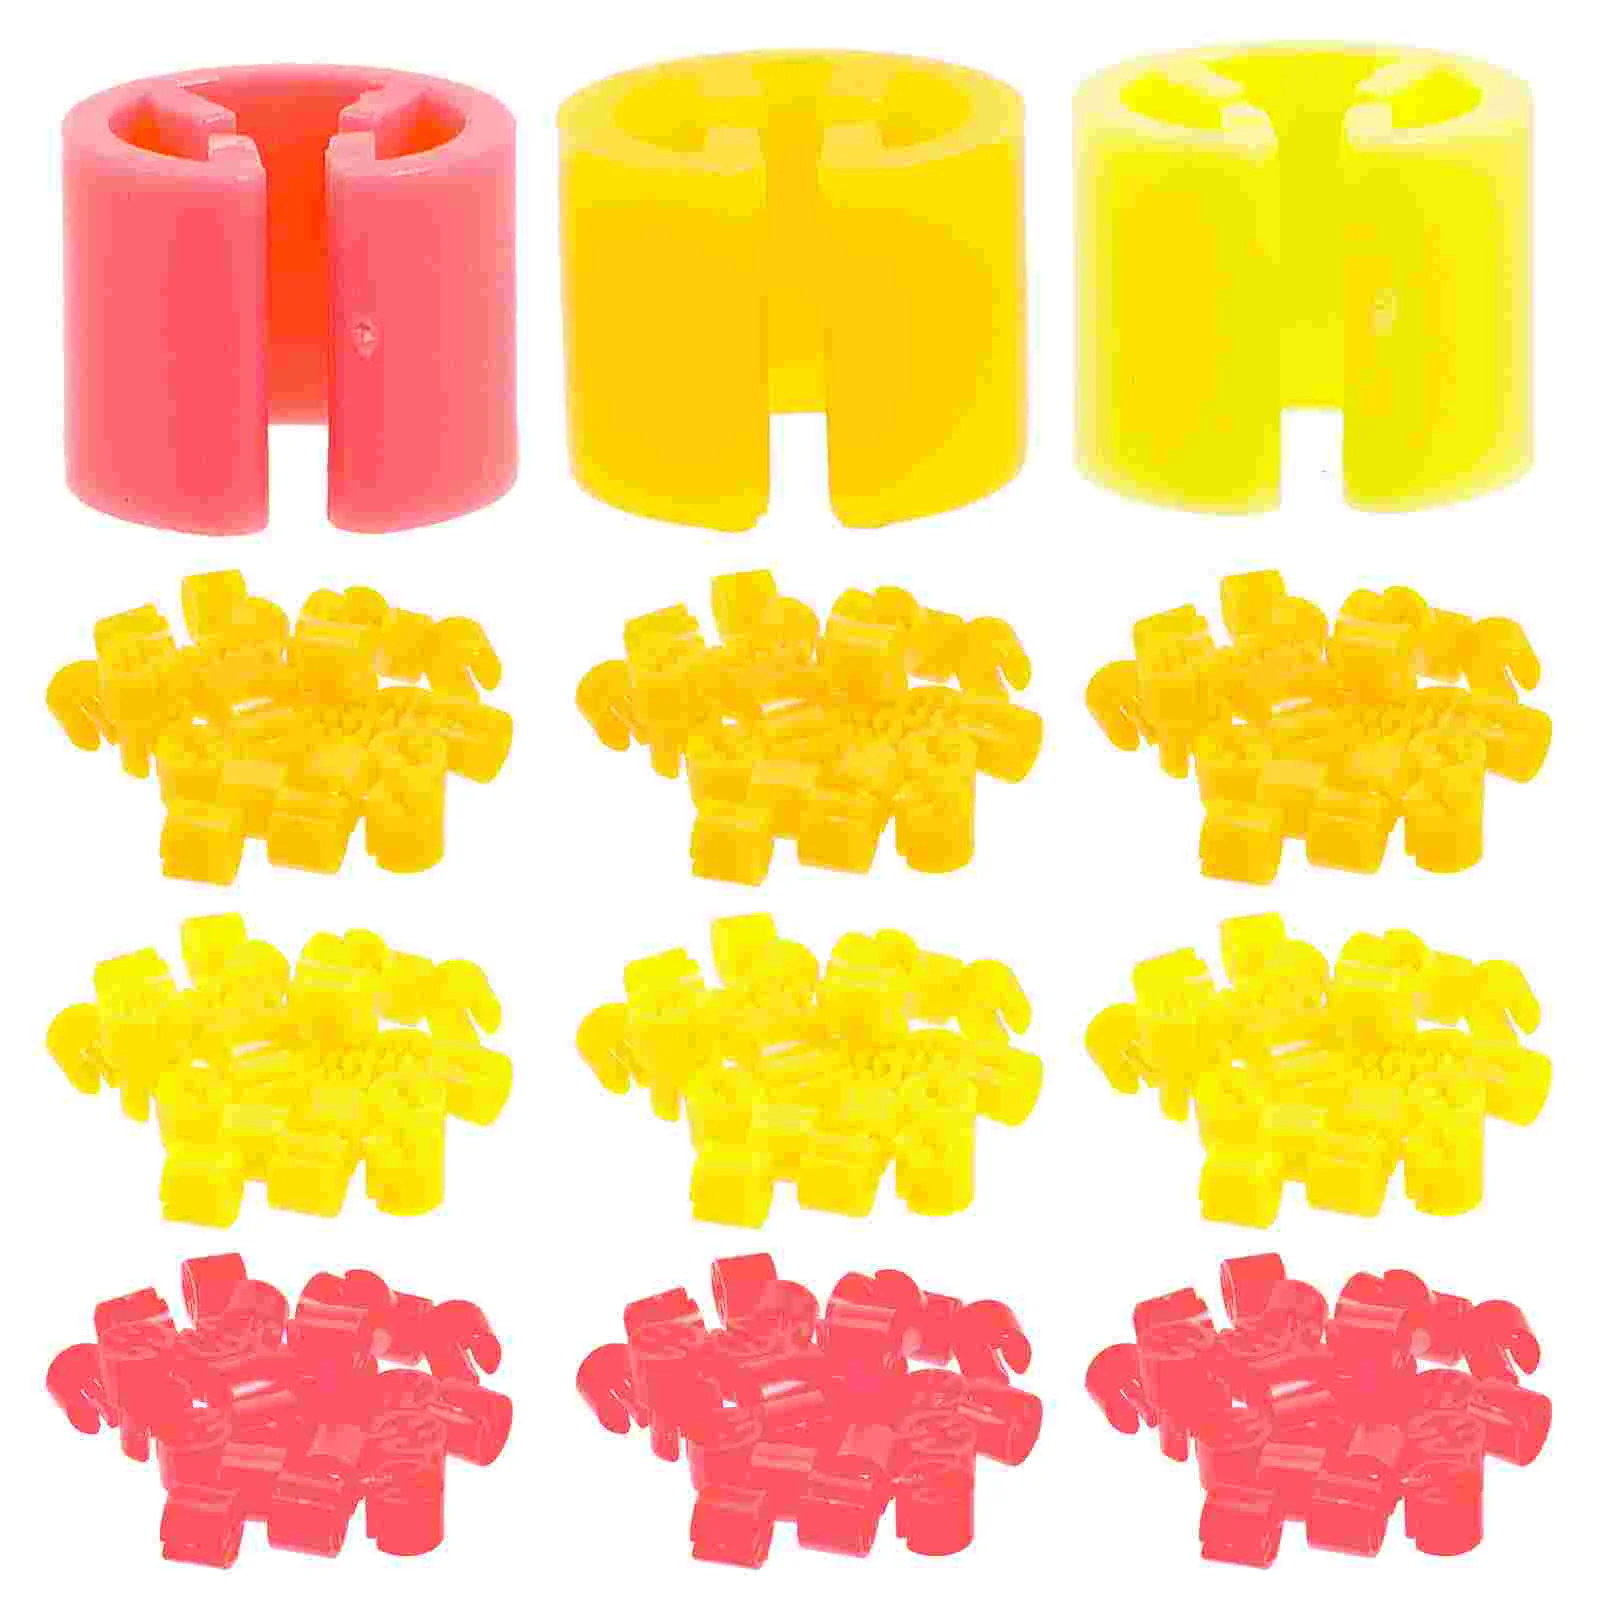 

300 Pcs Clothing Tag Buckle Hanger Size Markers Coding Sizes Tags Blank Labels Sizer Circle Frosted Button Household